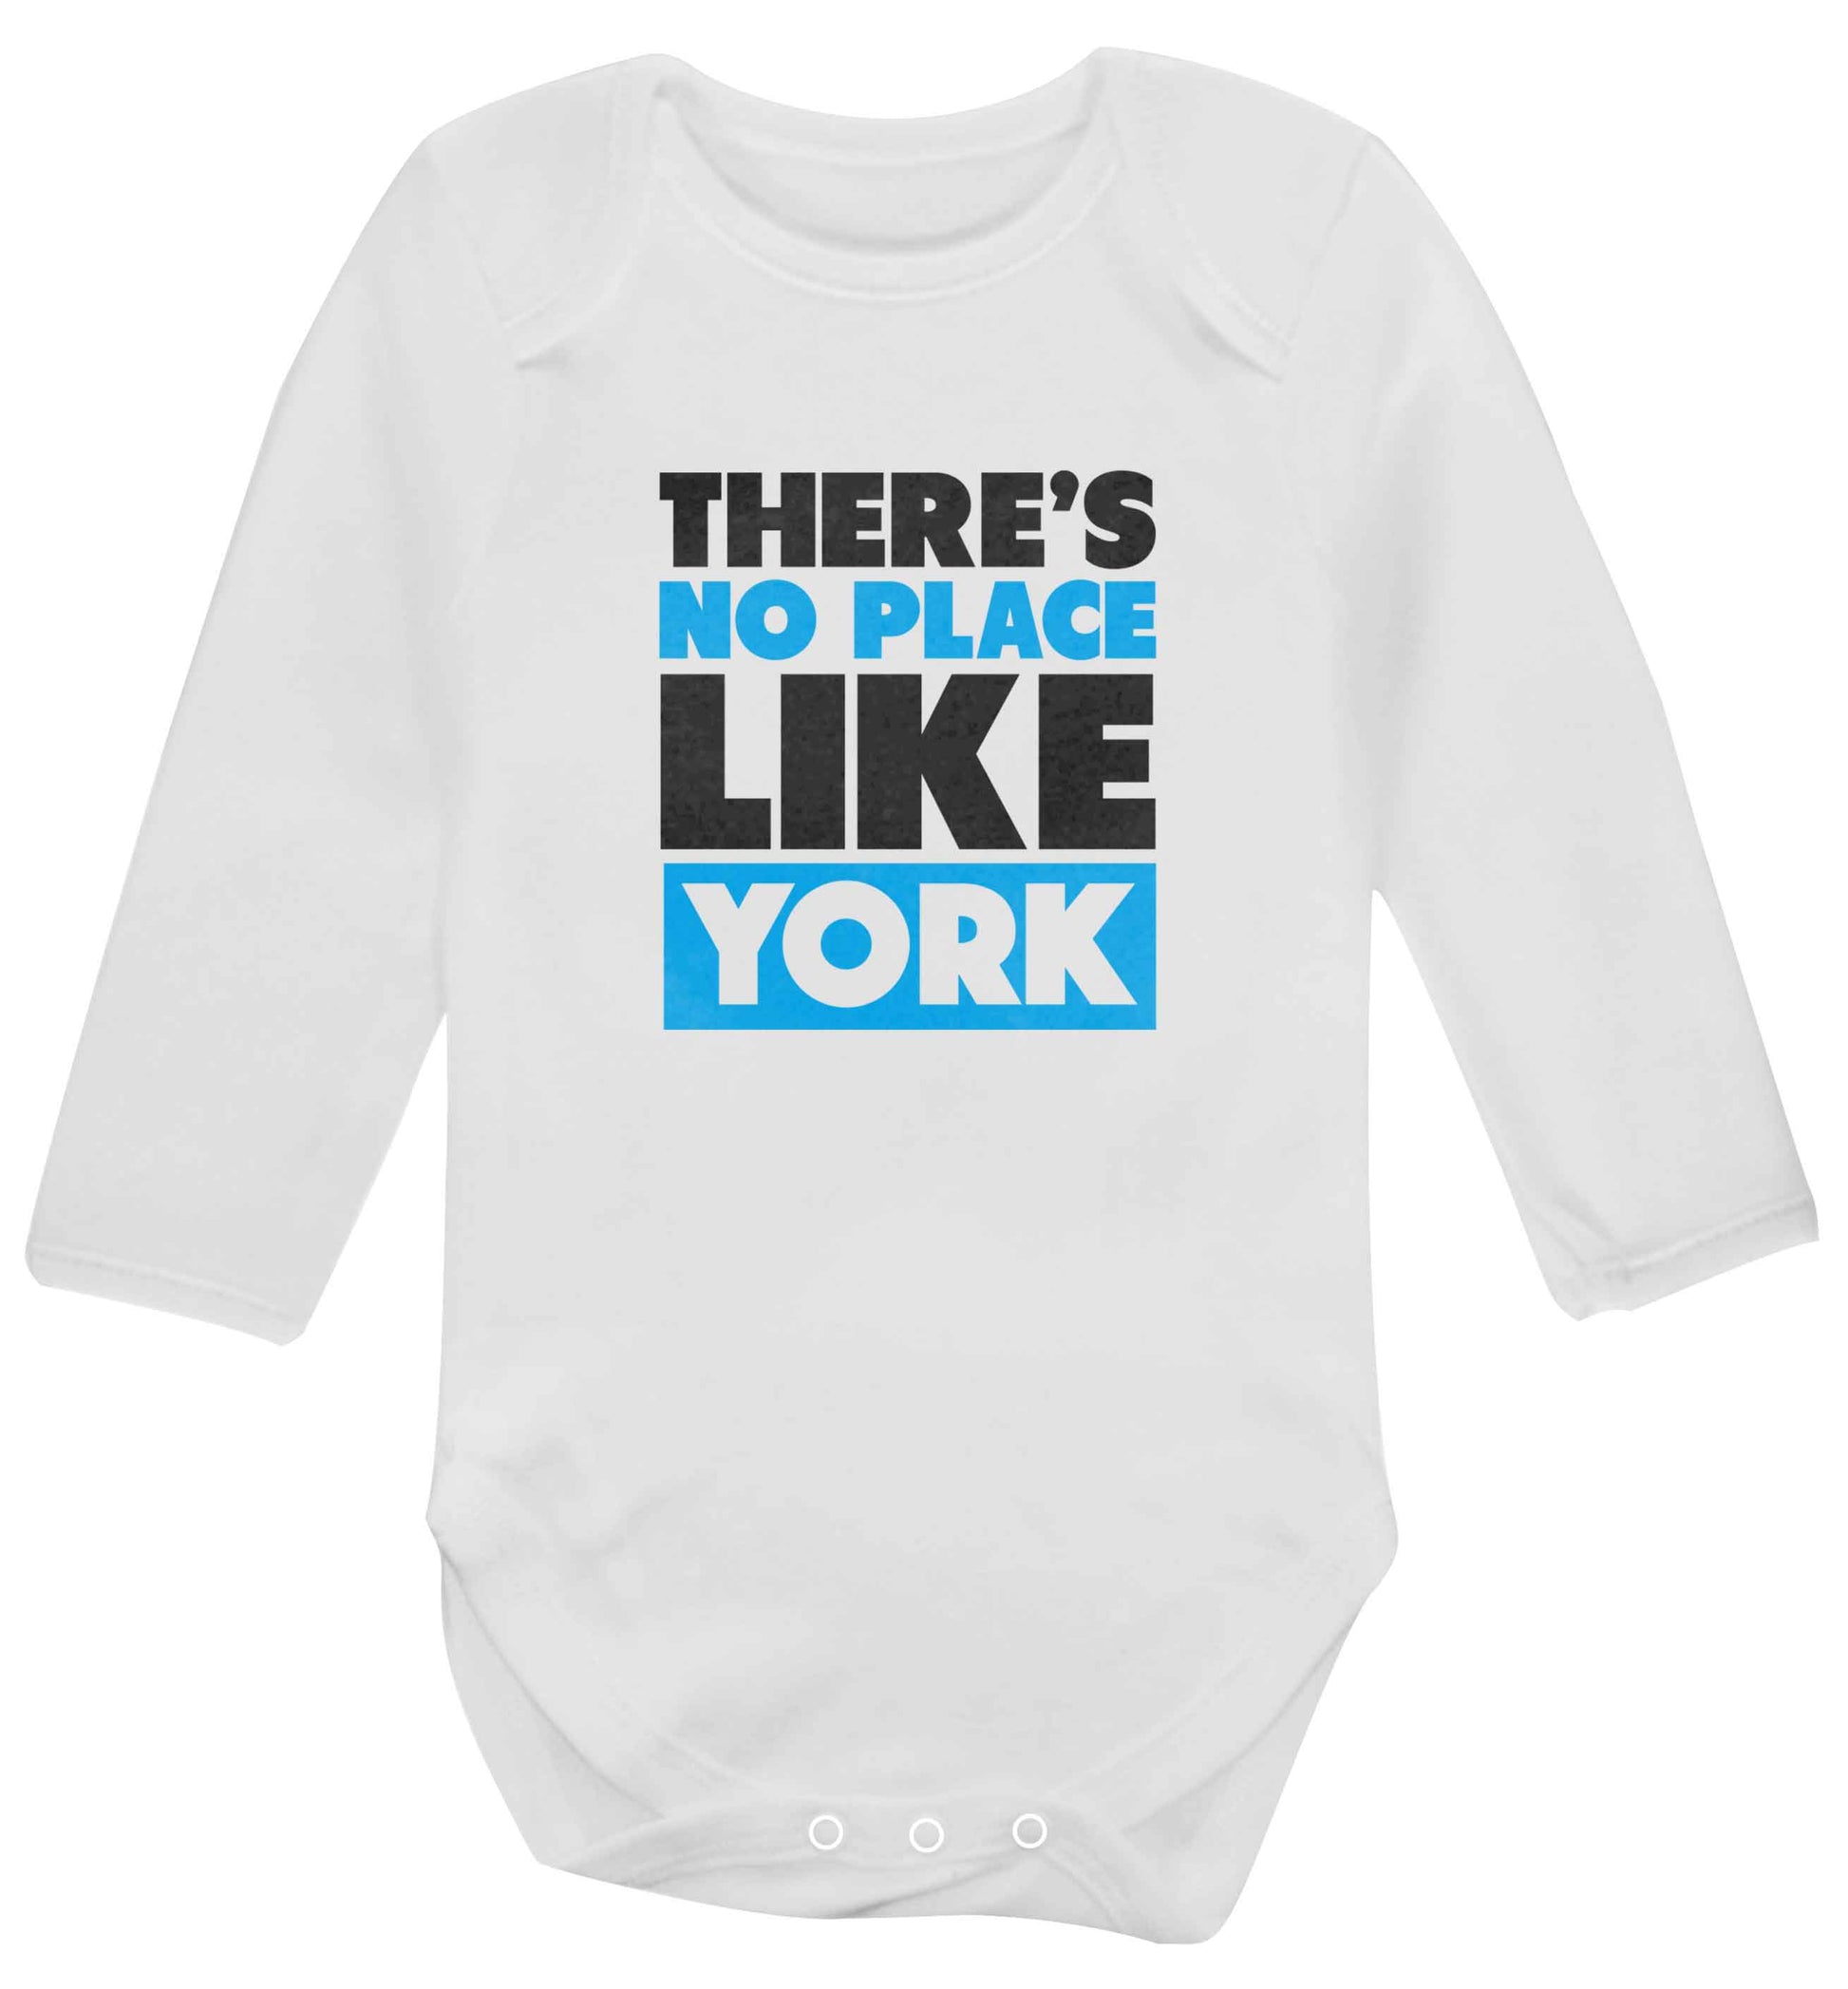 There's no place like york baby vest long sleeved white 6-12 months